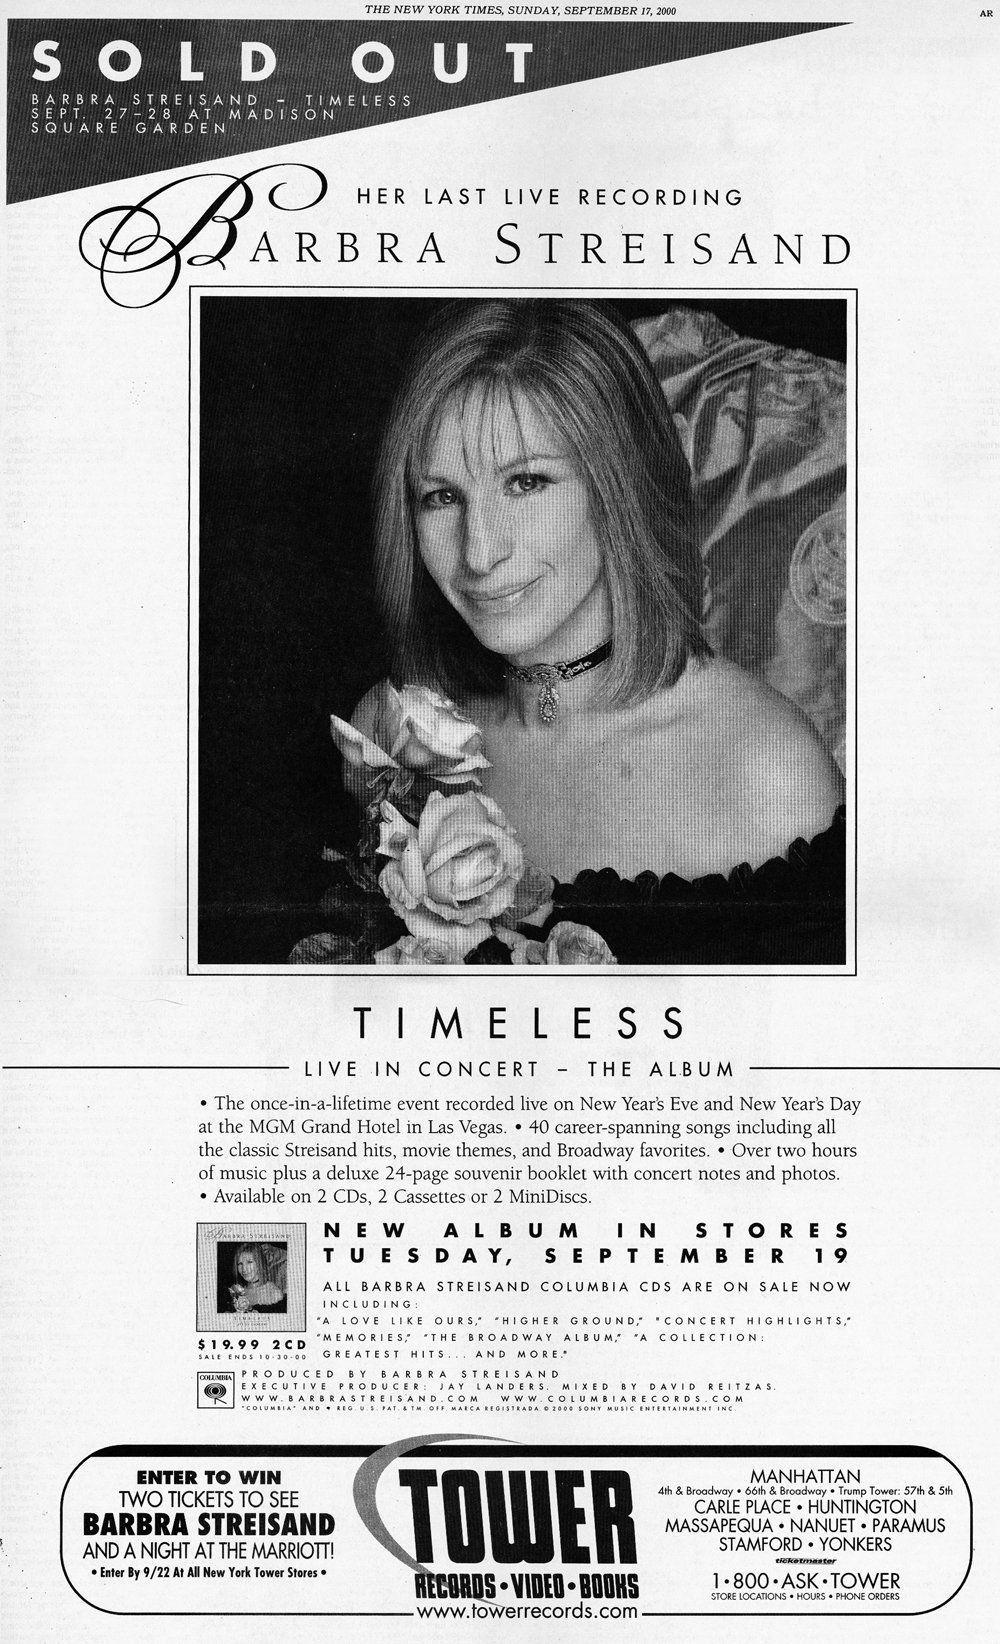 NY Times ad for the Timeless CD